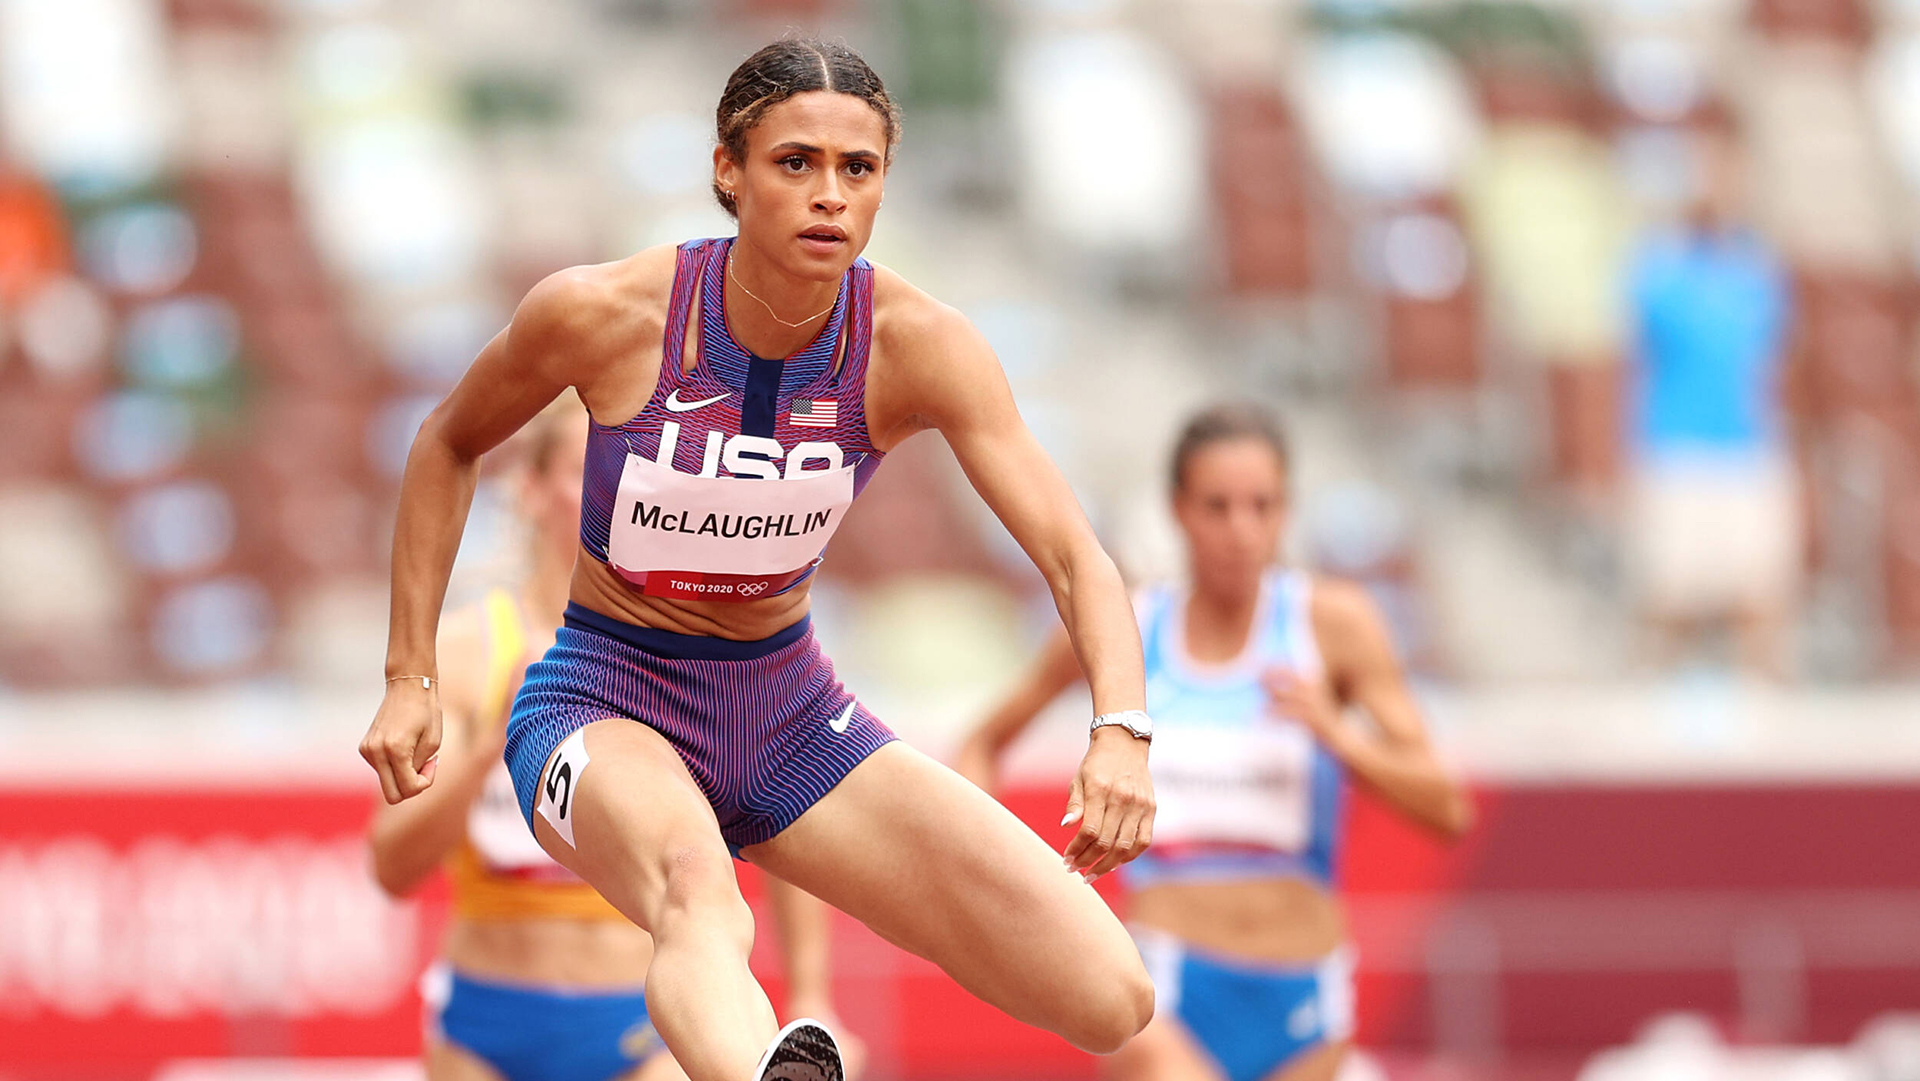 Masai Russell, Sydney McLaughlin-Levrone Win Gold on Final Day of U.S. Olympic Trials